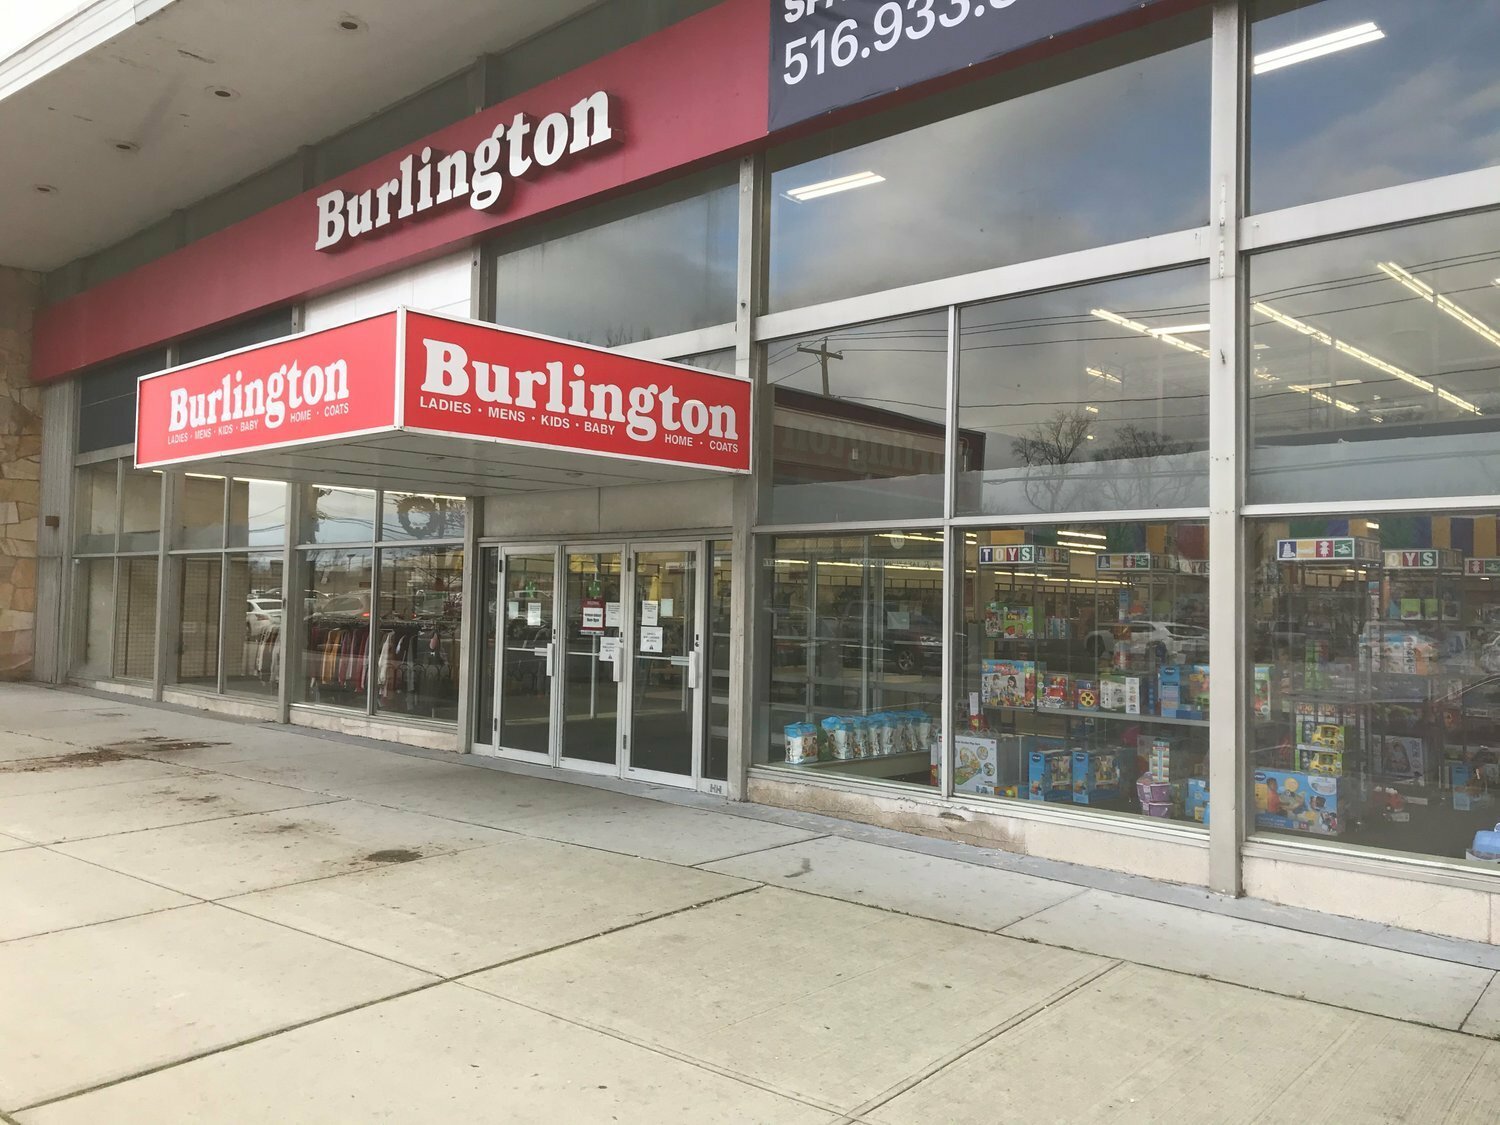 The 55,000-square-foot structure at 199 East Main Street in Patchogue, formerly Burlington Coat Factory, will be made into a surgical center with medical offices.